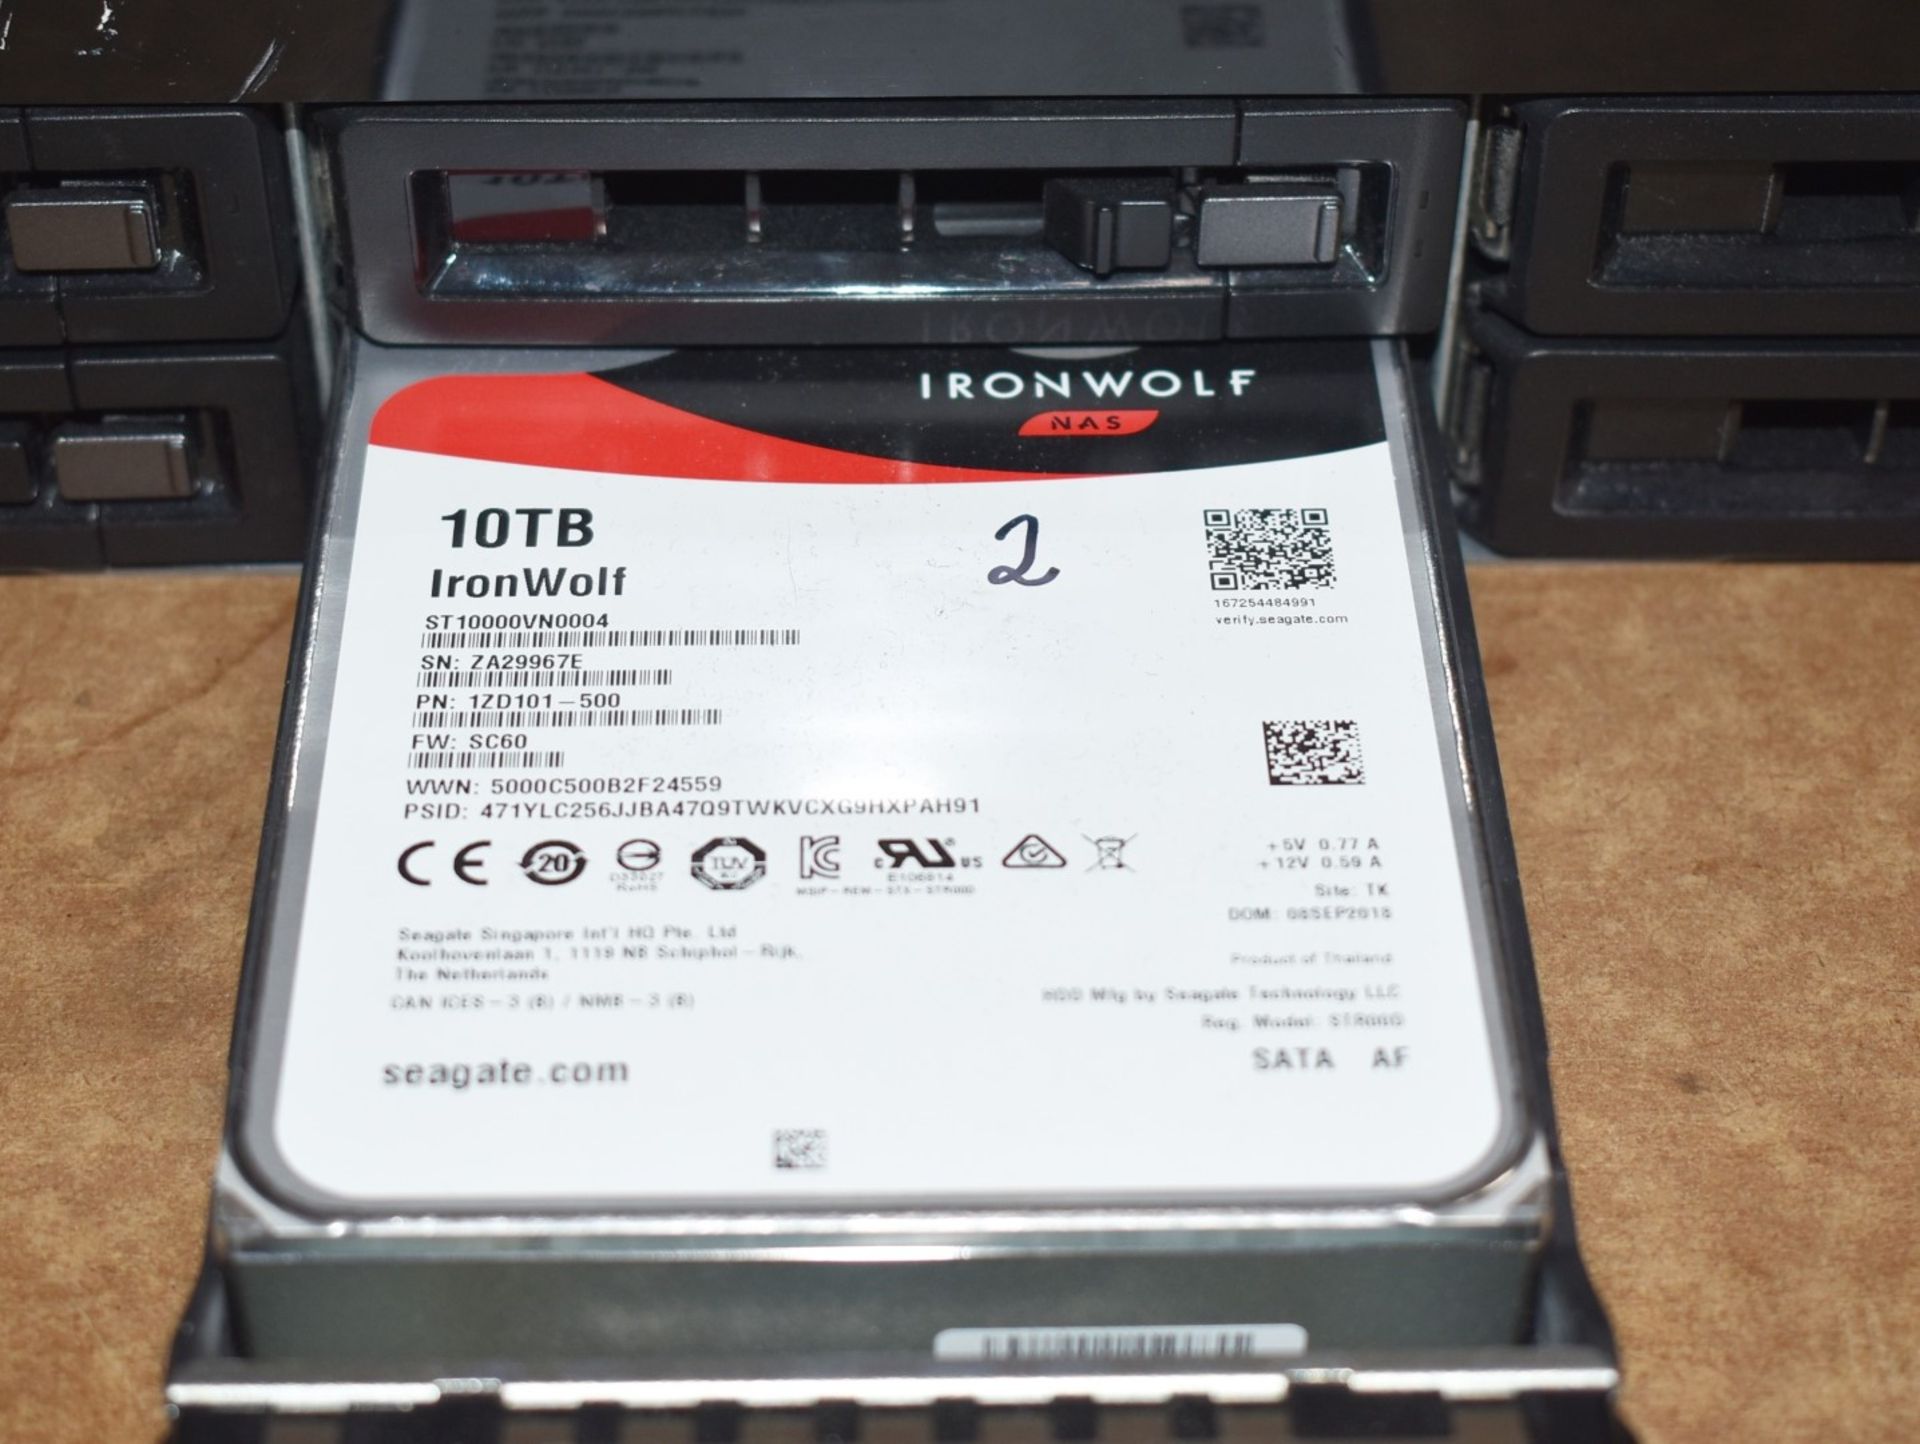 1 x QNAP Network Attached Storage Unit - Model TS-879U-RP - Includes 3 x Ironwolf 10tb Hard Drives - Image 5 of 11